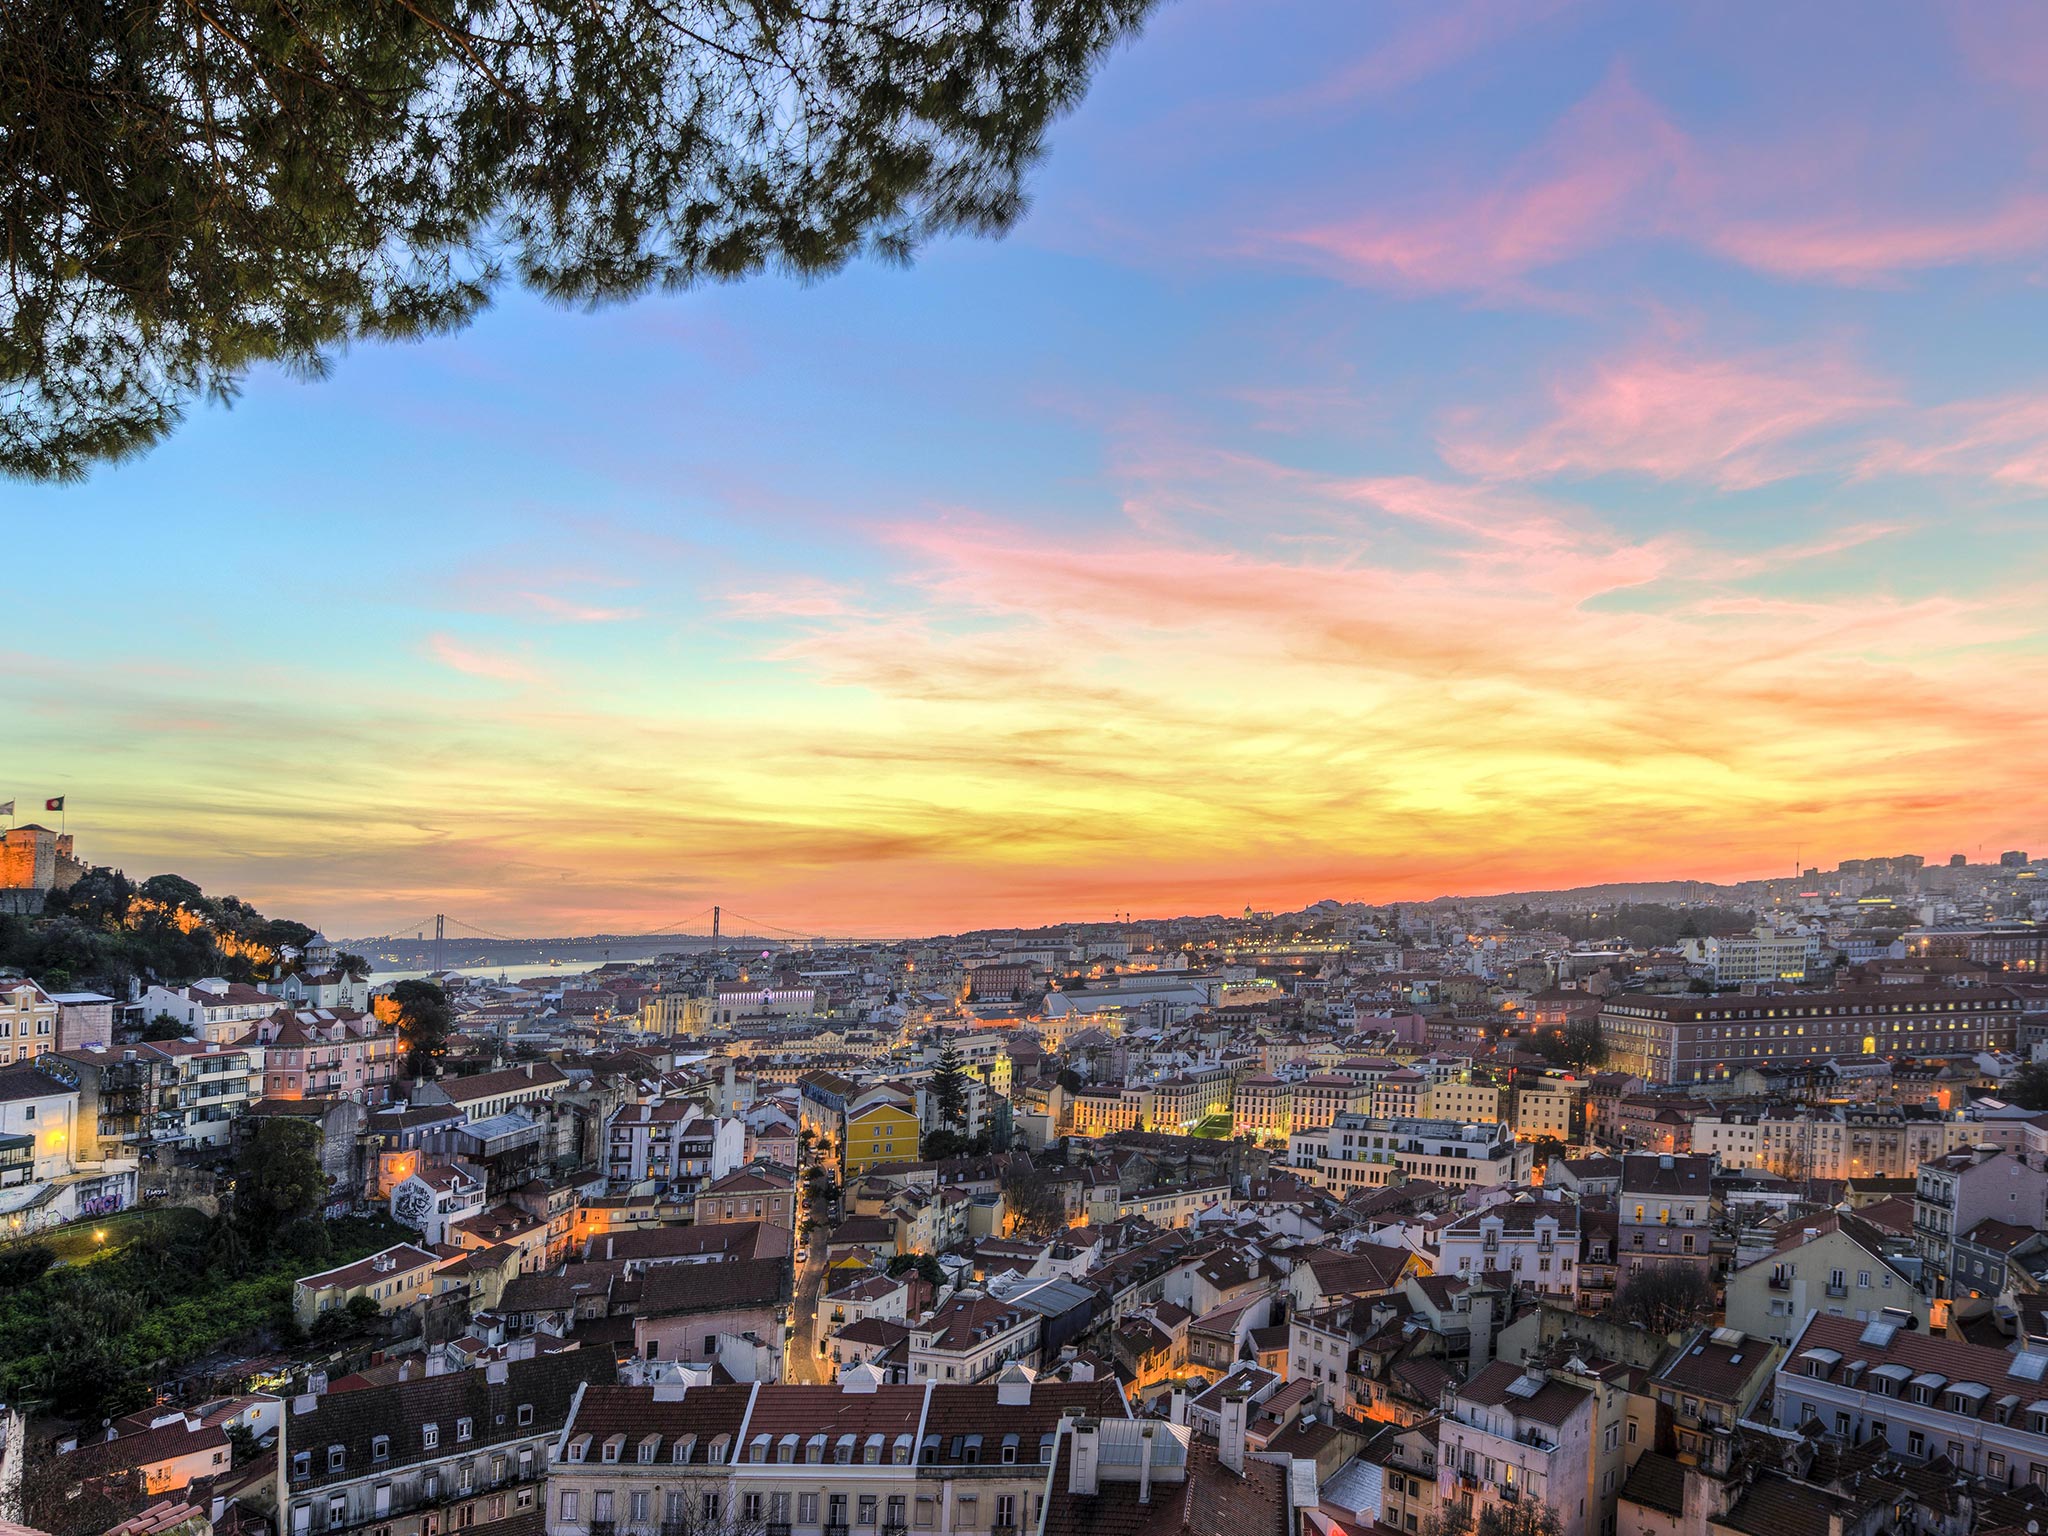 The Portuguese capital has the edge when it comes spectacular scenery